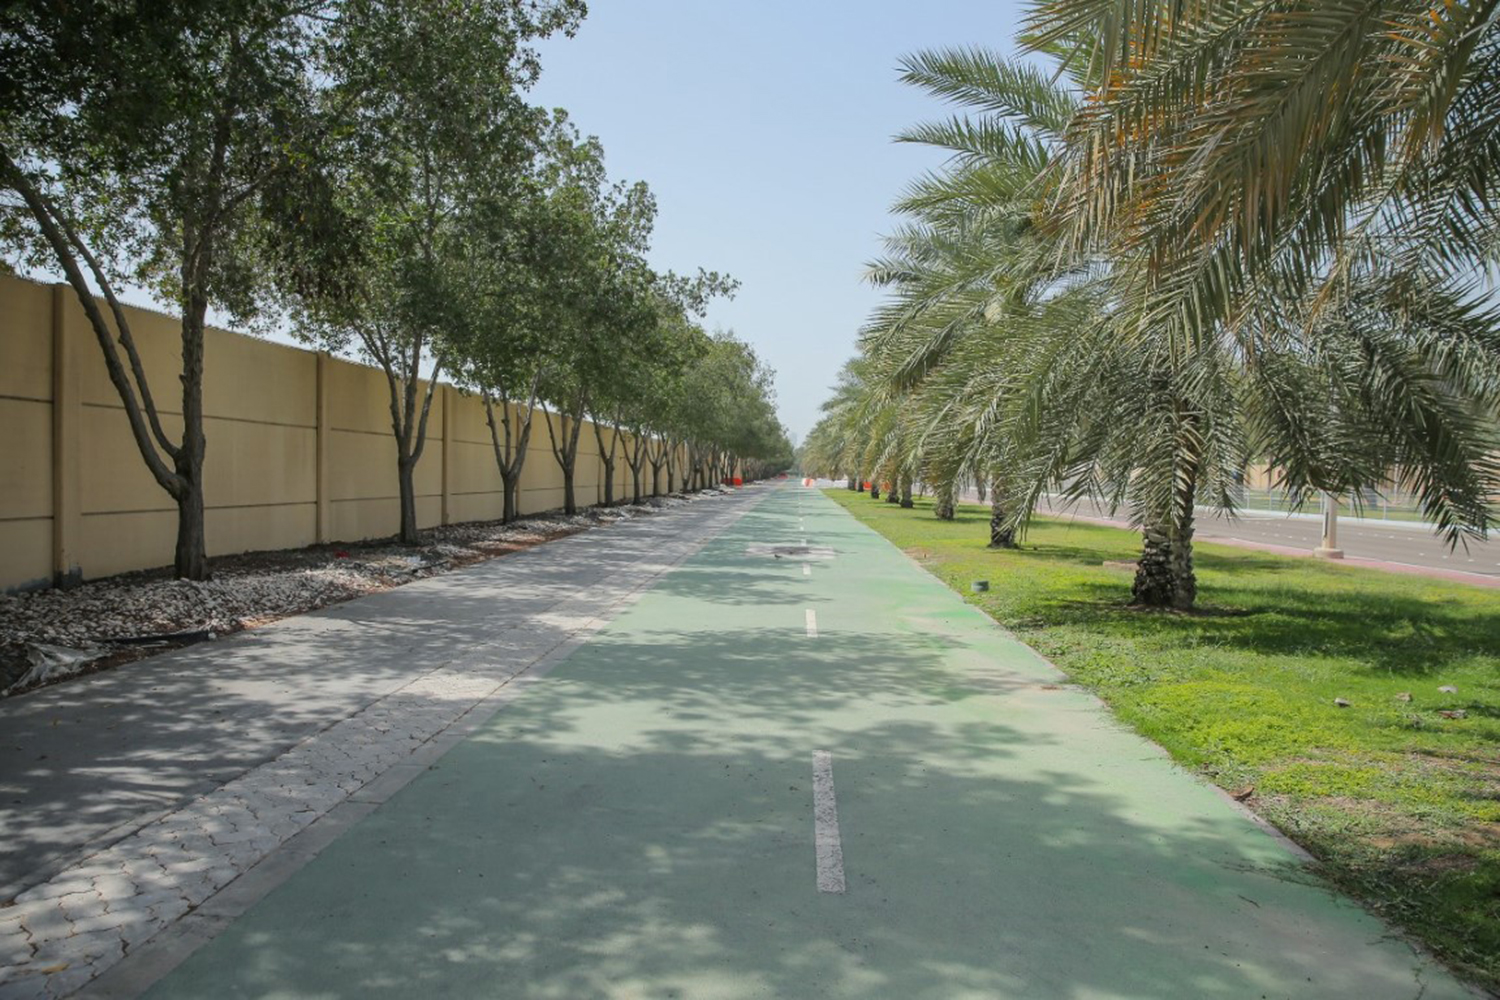  Abu  Dhabi s new running and cycling tracks are almost 